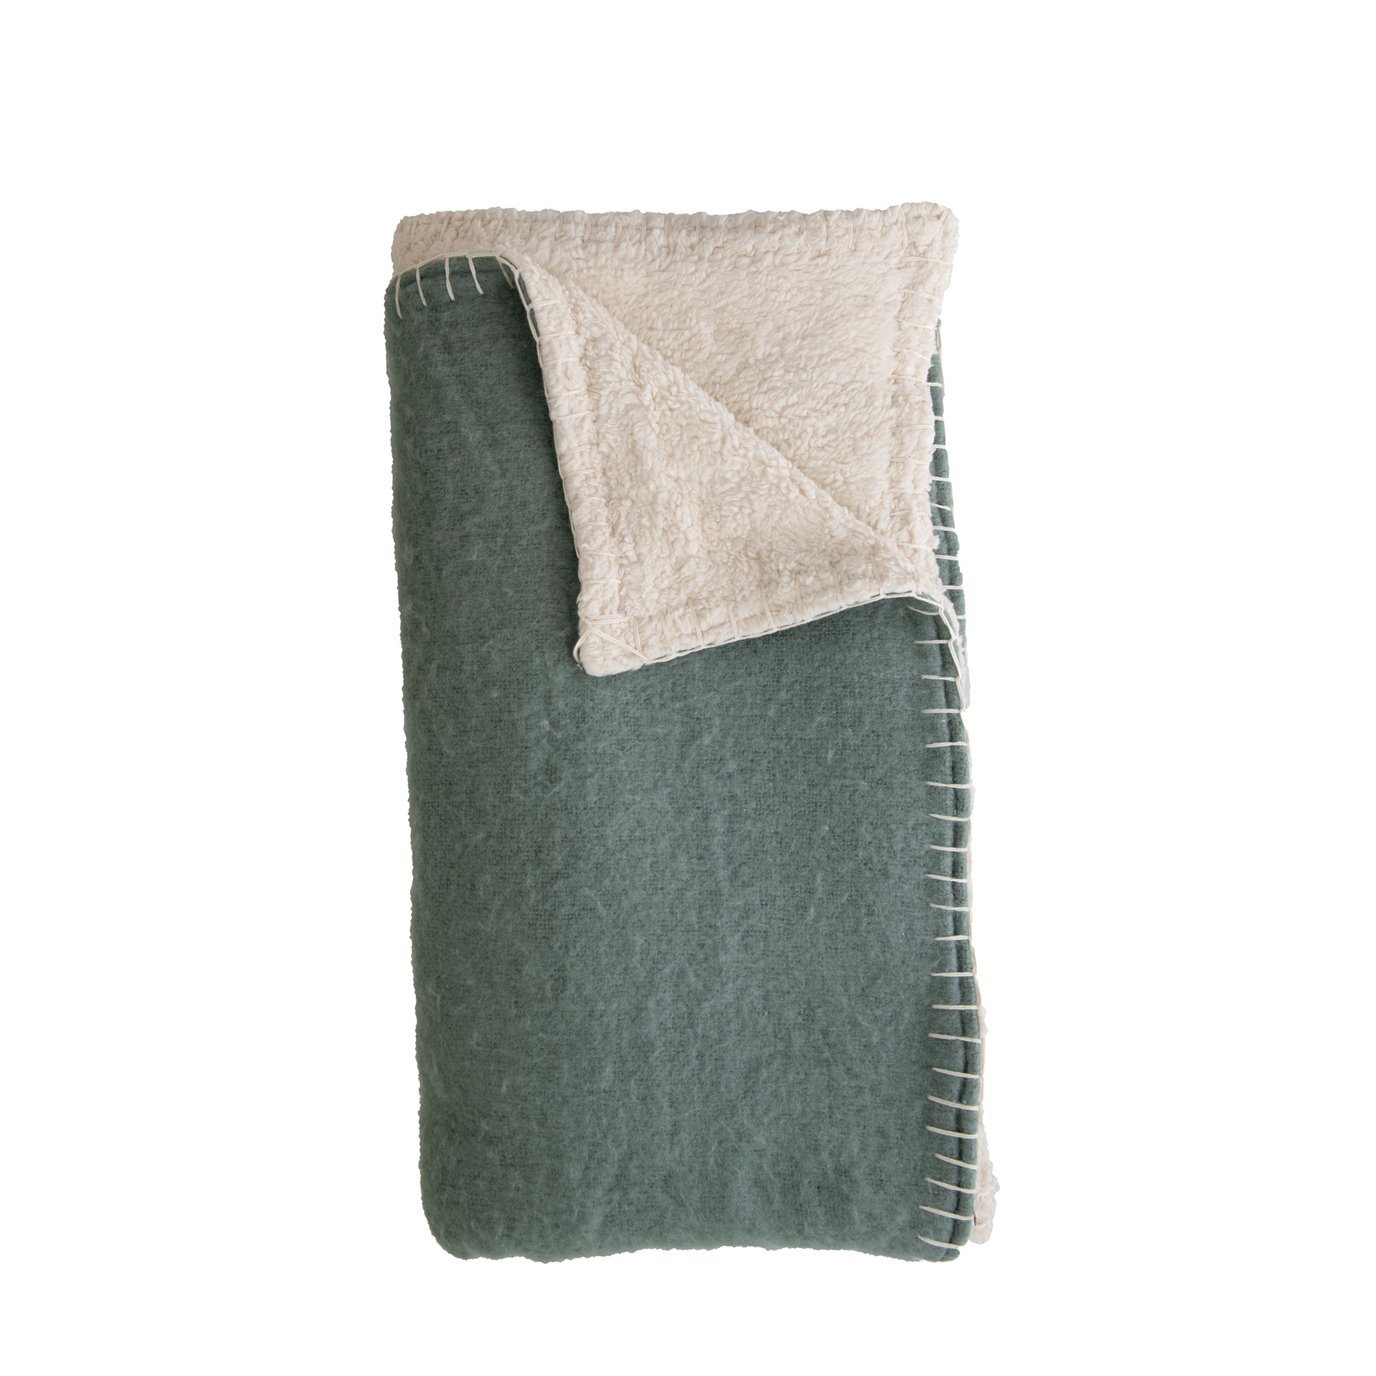 Blanket Stitch Blue and Cream Woven Acrylic Sherpa Throw